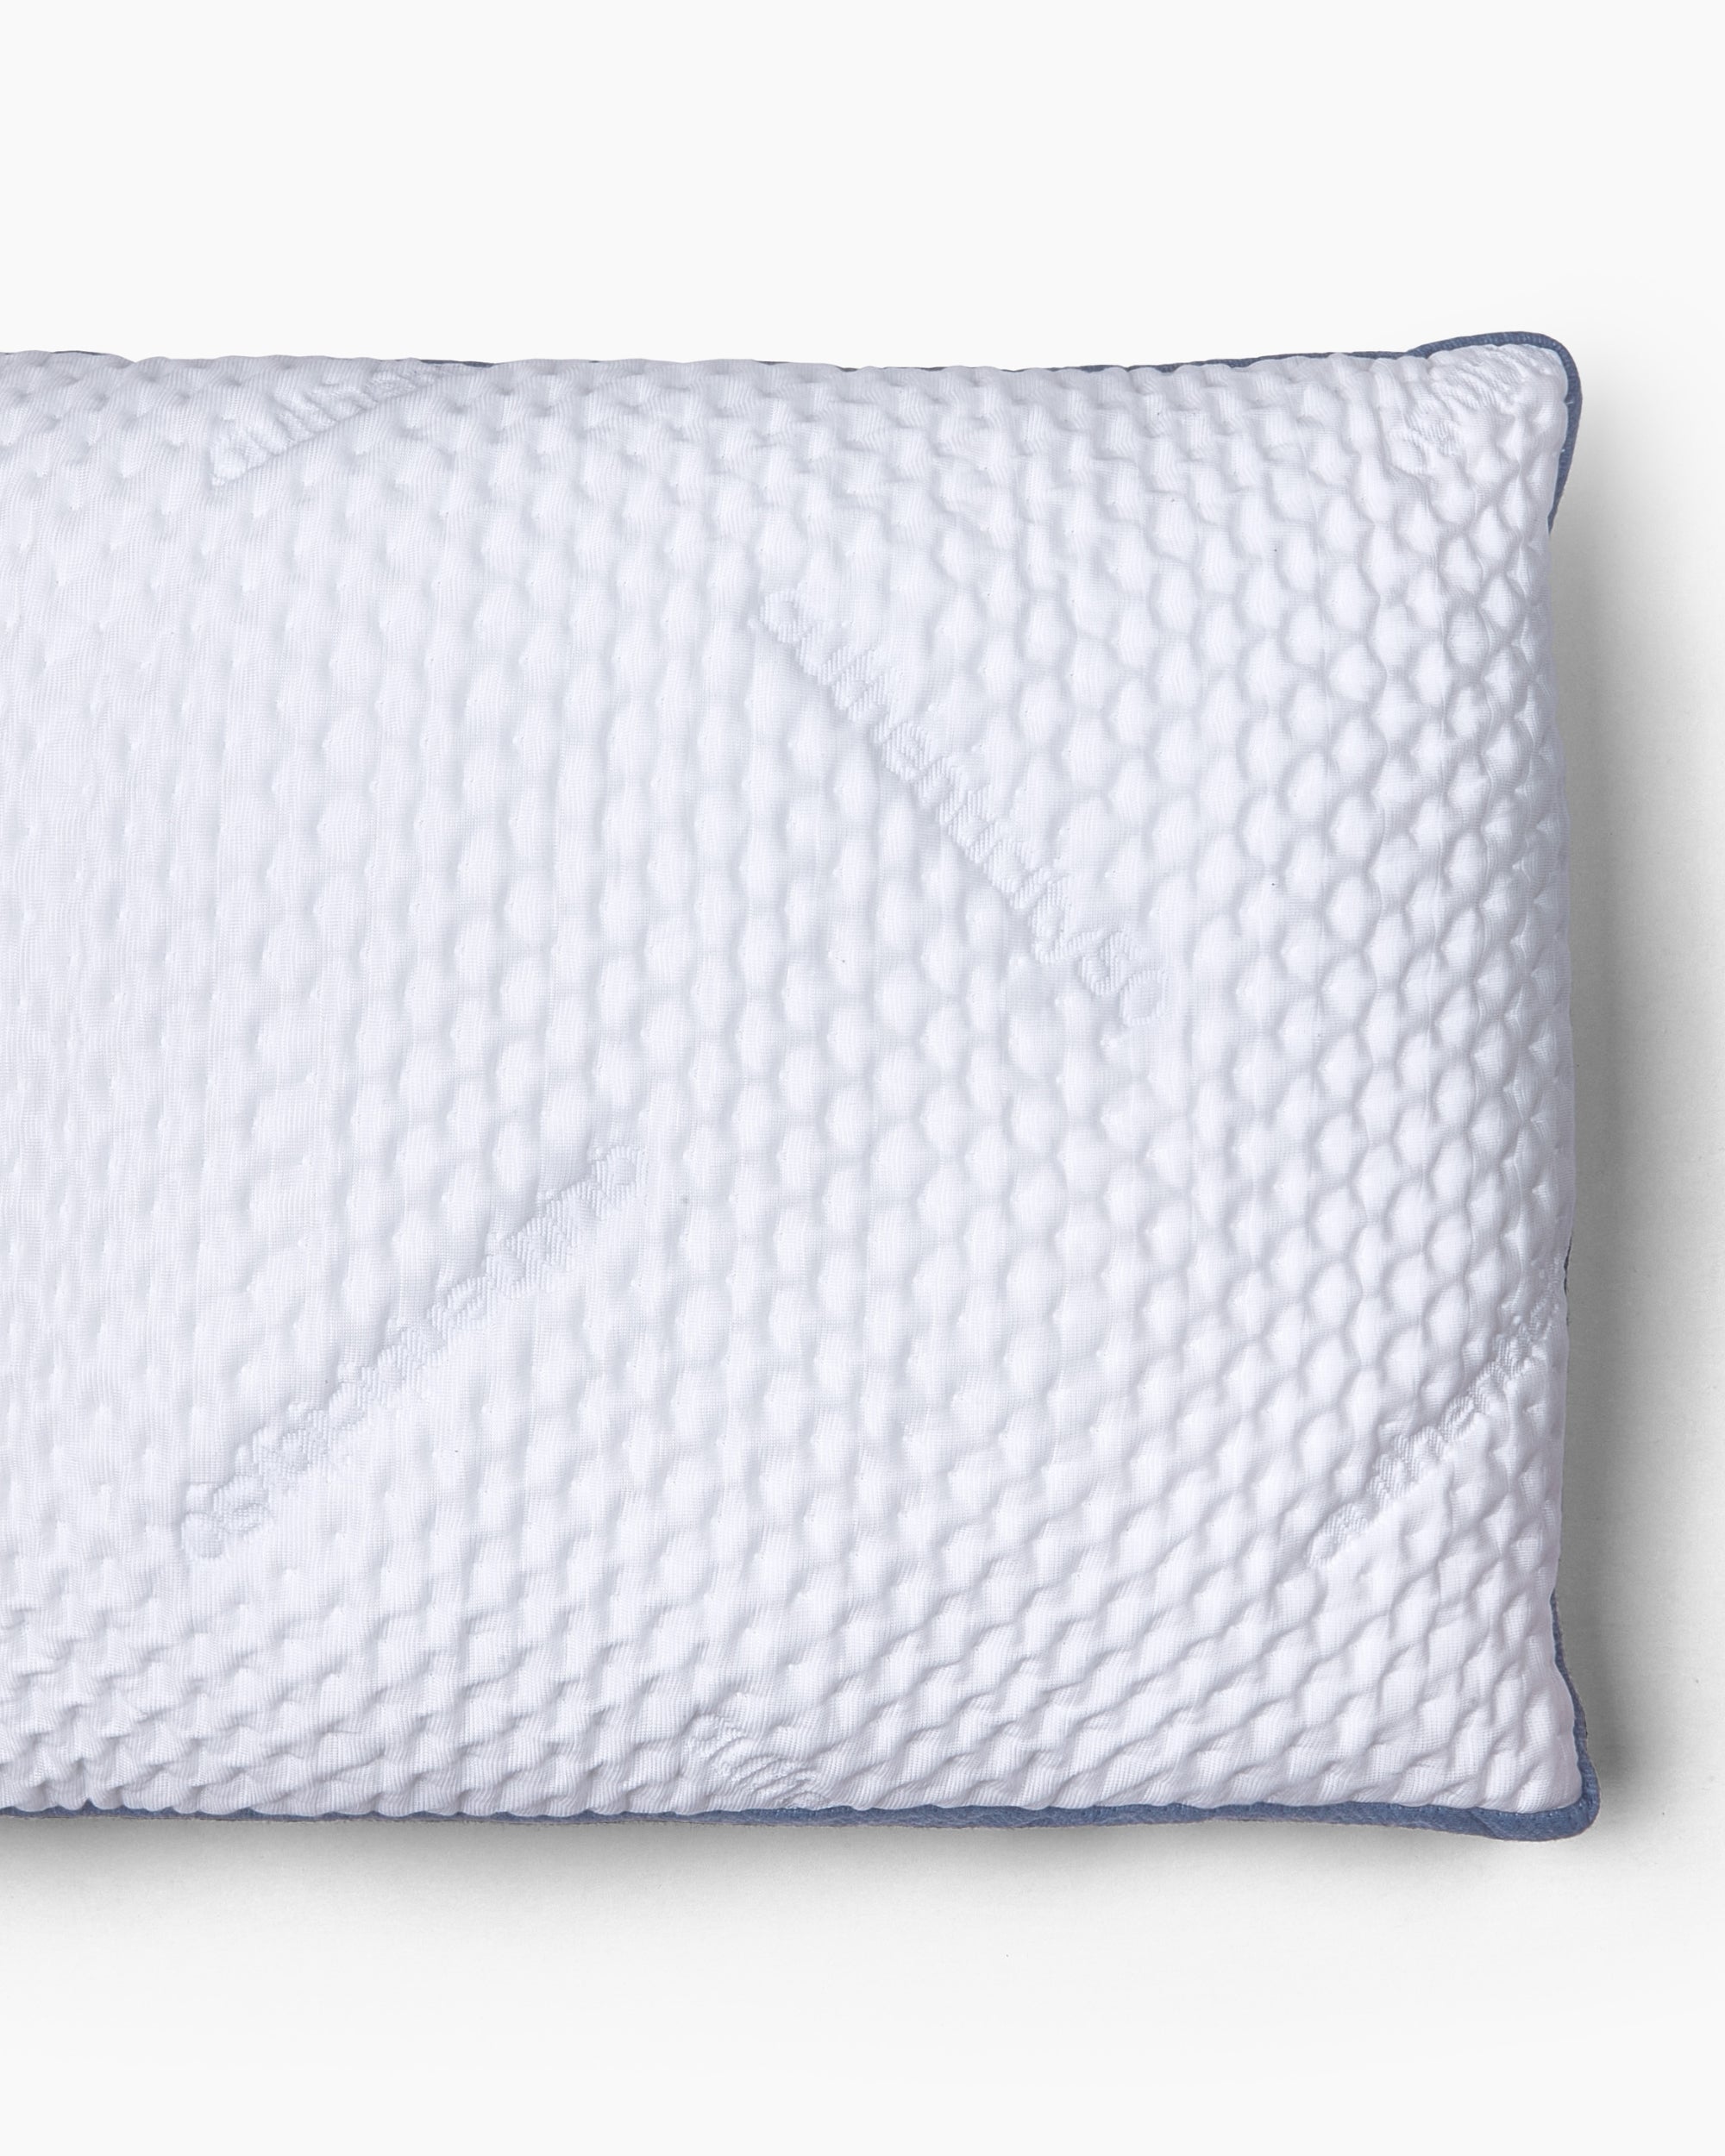 Economy Foam Pillow Products